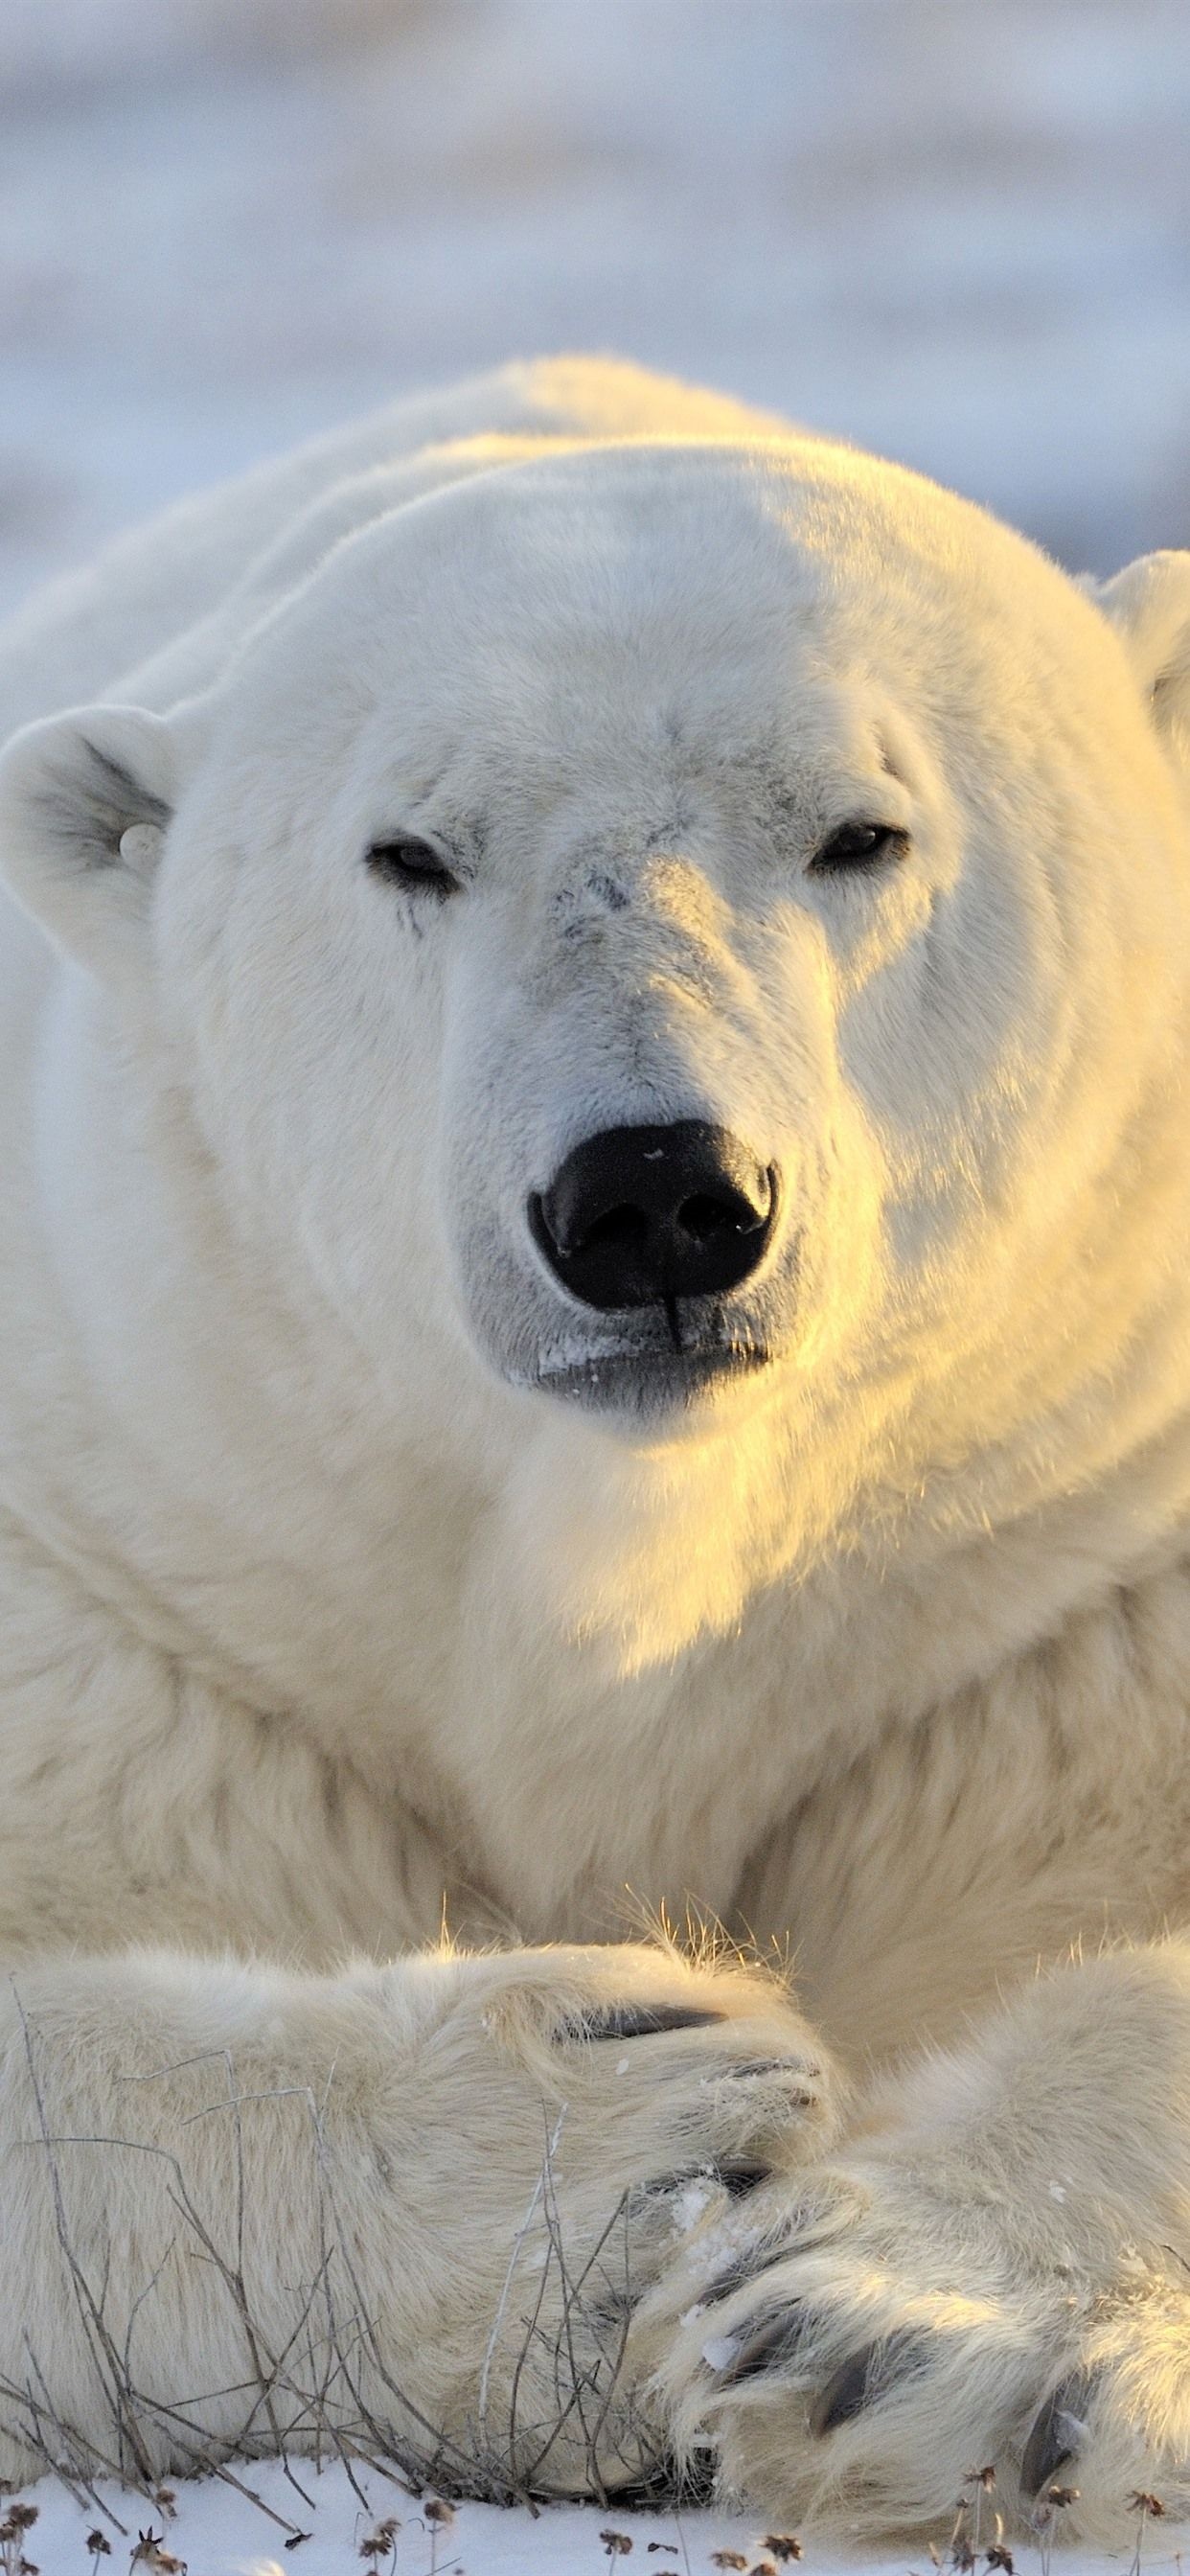 Polar-themed wallpapers, iPhone backgrounds, Arctic inspiration, Animal beauty, 1250x2690 HD Phone